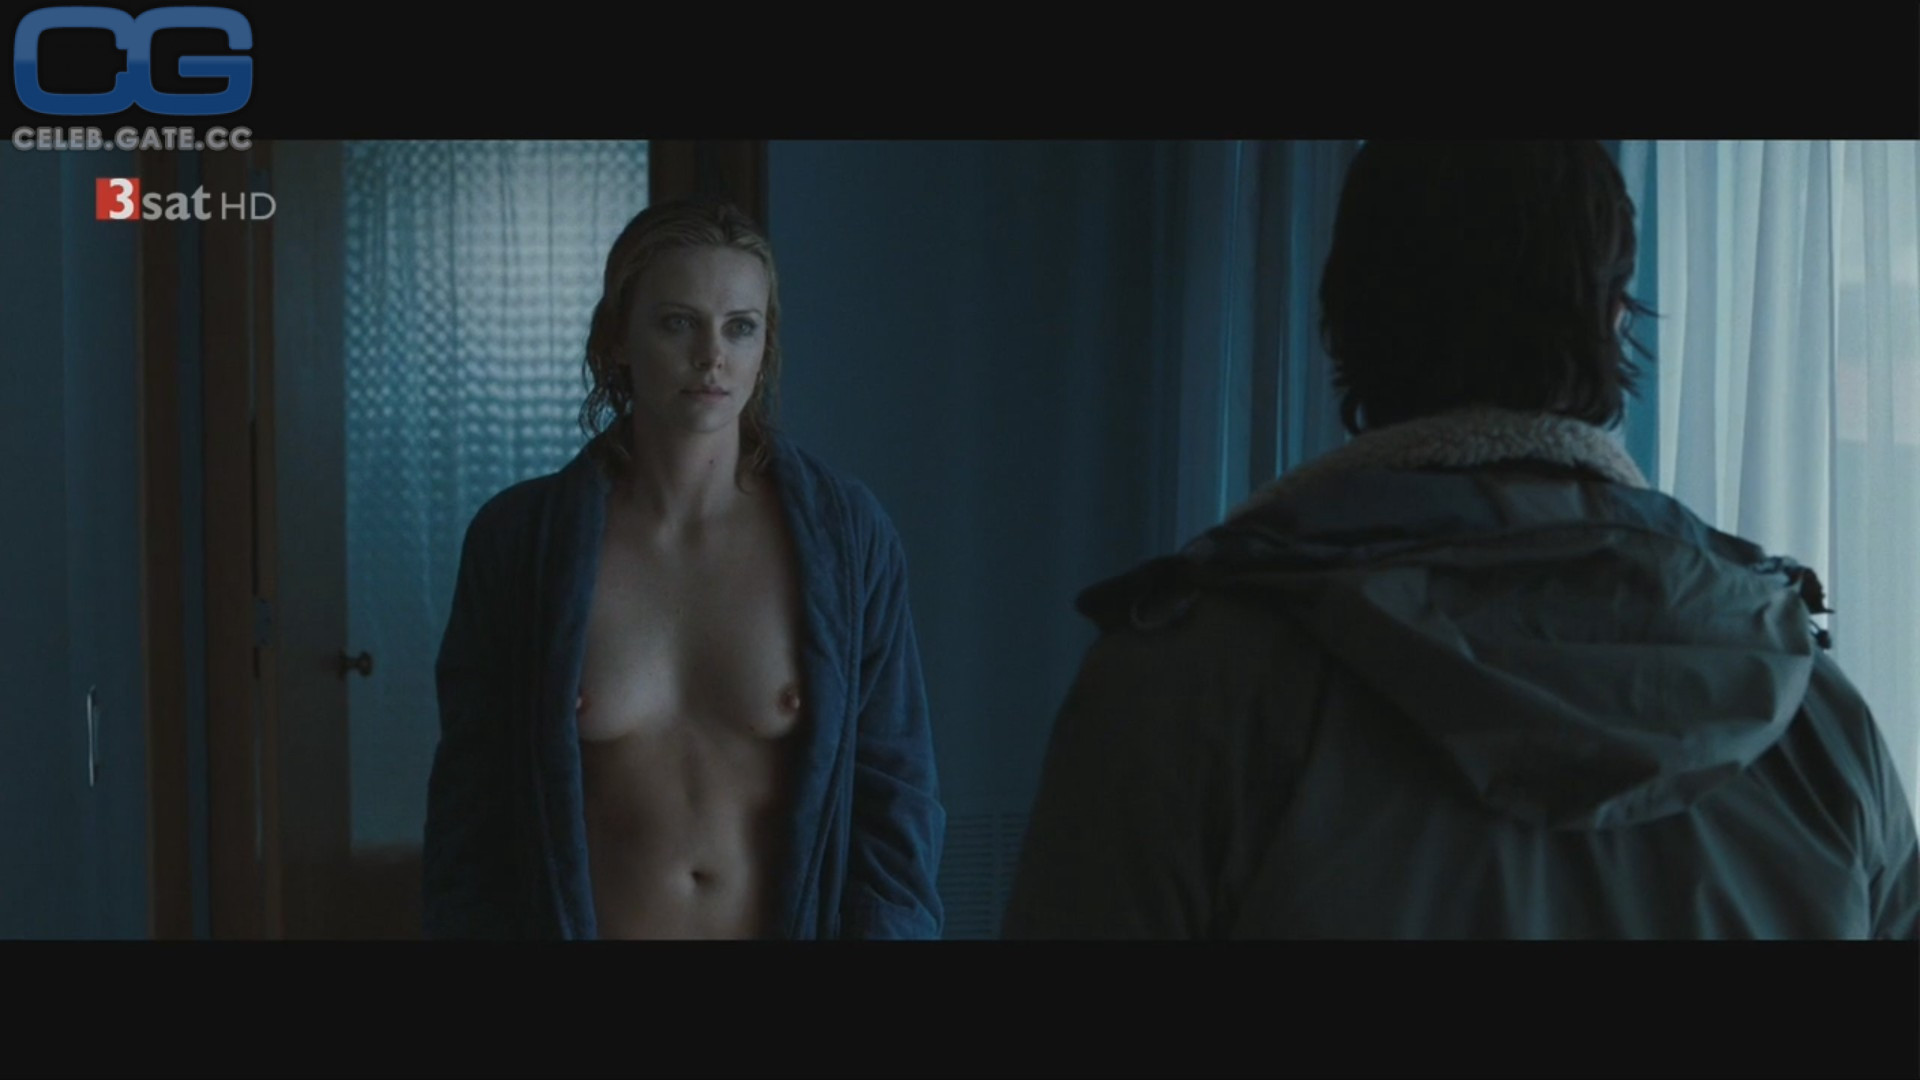 Theron fappening charlize 